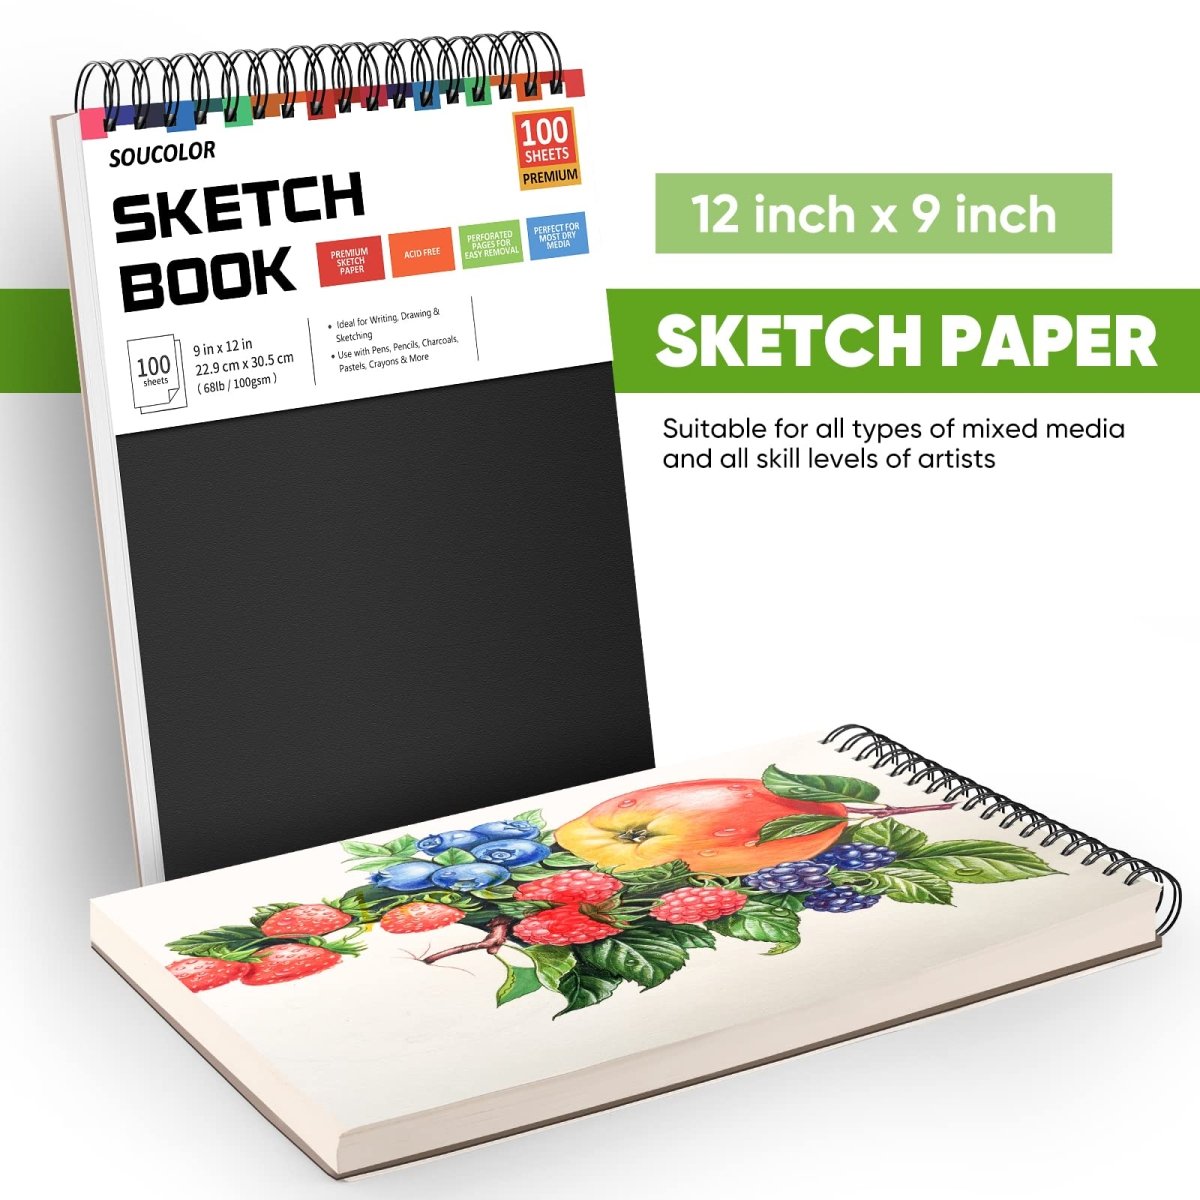 Soucolor 9" x 12" Sketch Book, 1-Pack 100 Sheets Spiral Bound Art Sketchbook, Acid Free (68lb/100gsm) Artist Drawing Book Paper Painting Sketching Pad - Tattoo Unleashed